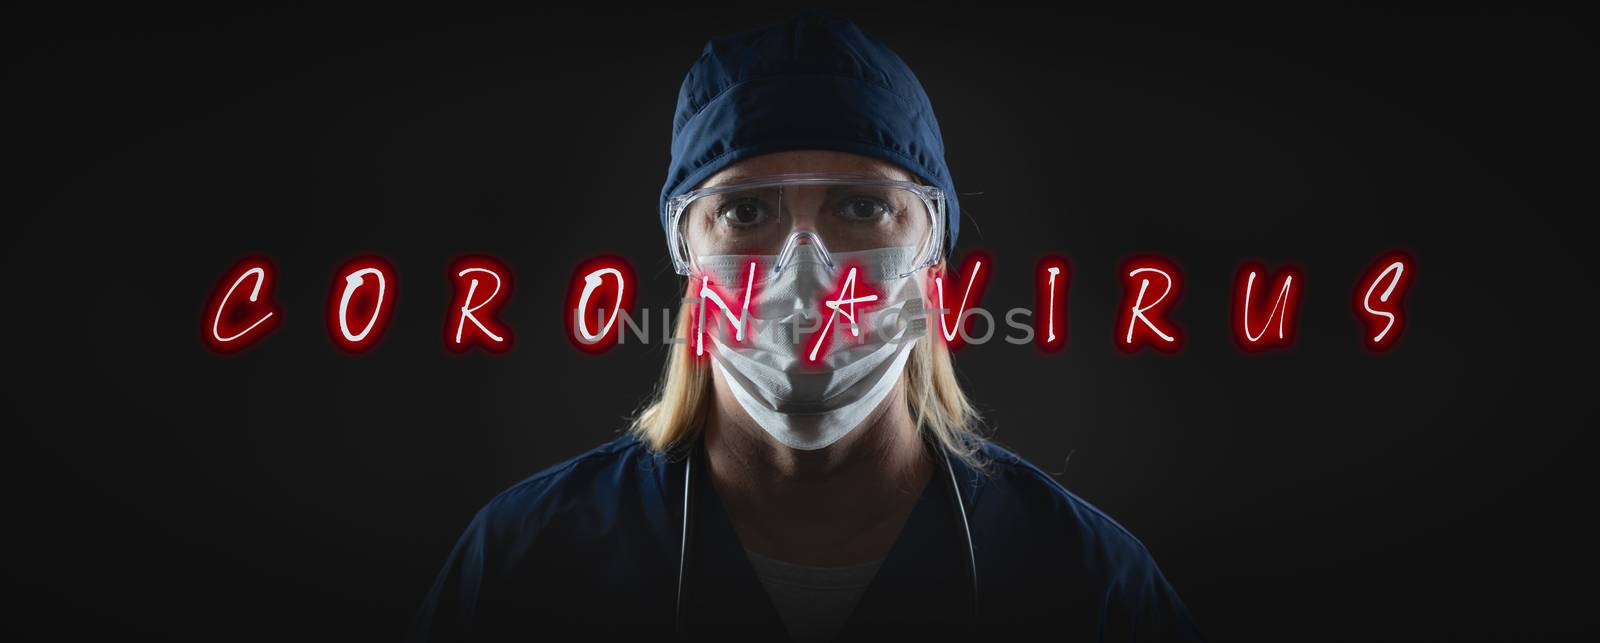 Banner of Female Doctor or Nurse In Medical Face Mask and Protective Gear With Coronavirus Text In Front.